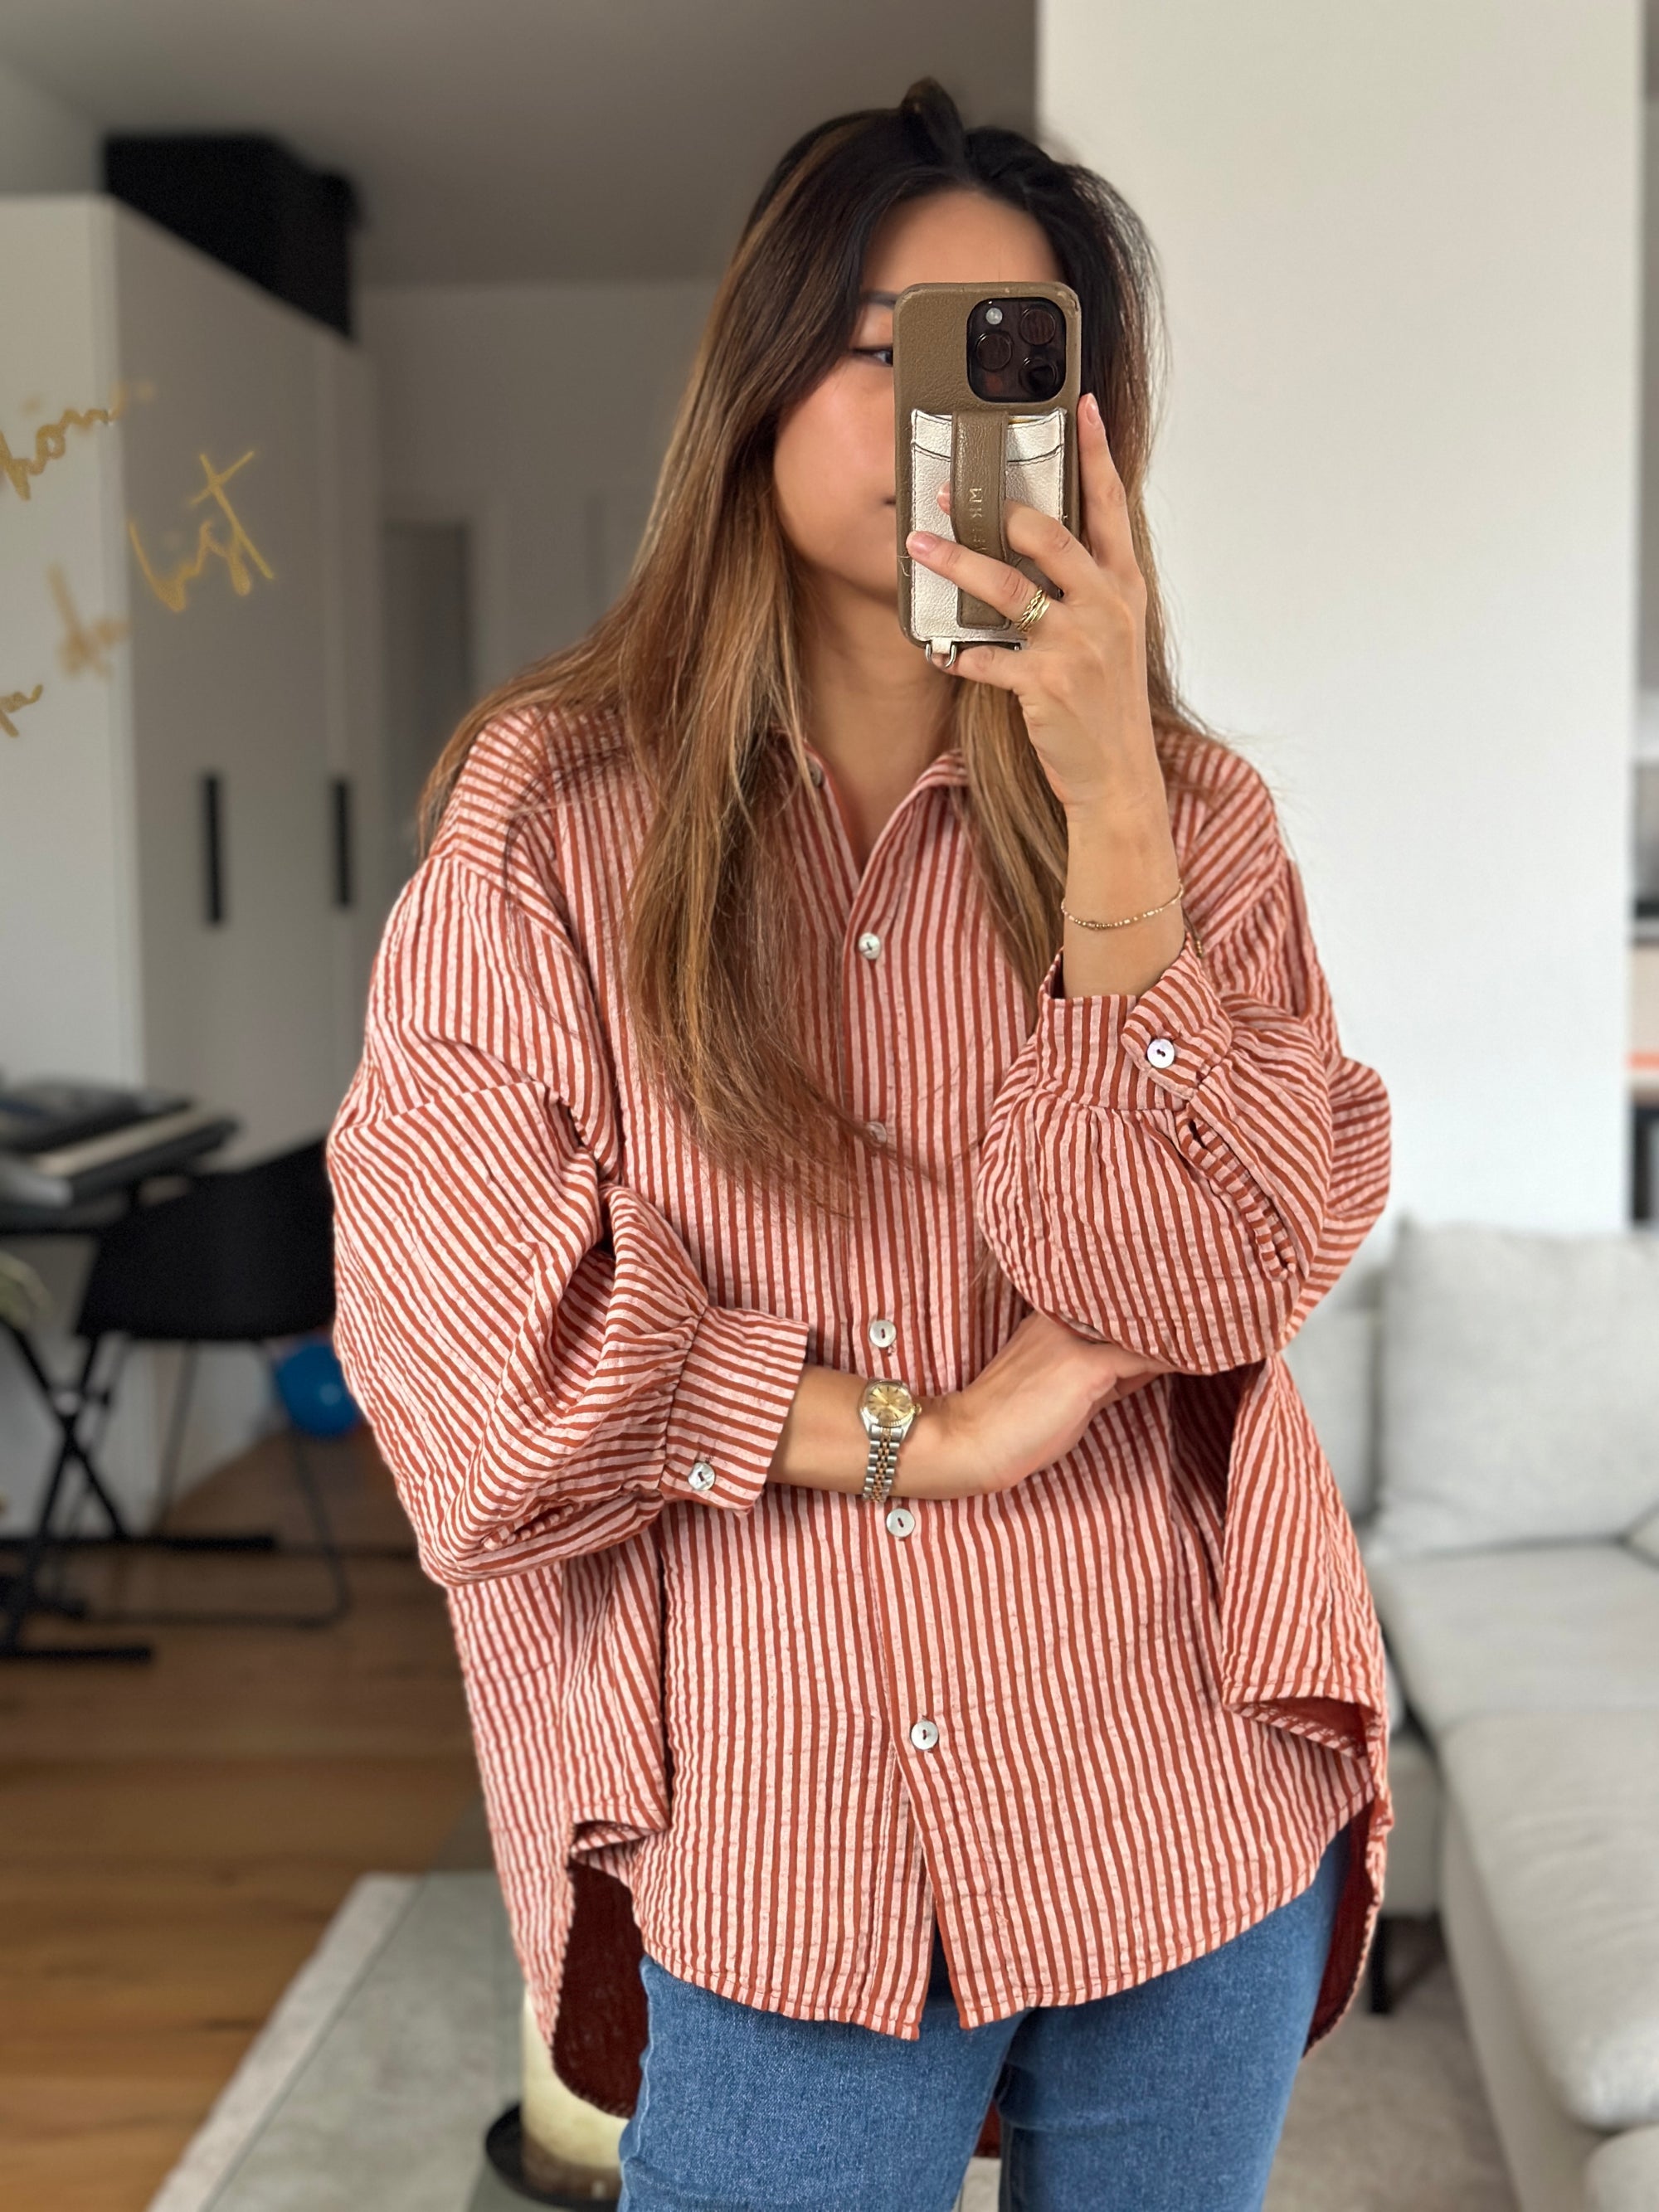 Musselin Bluse Stripes Rostrot